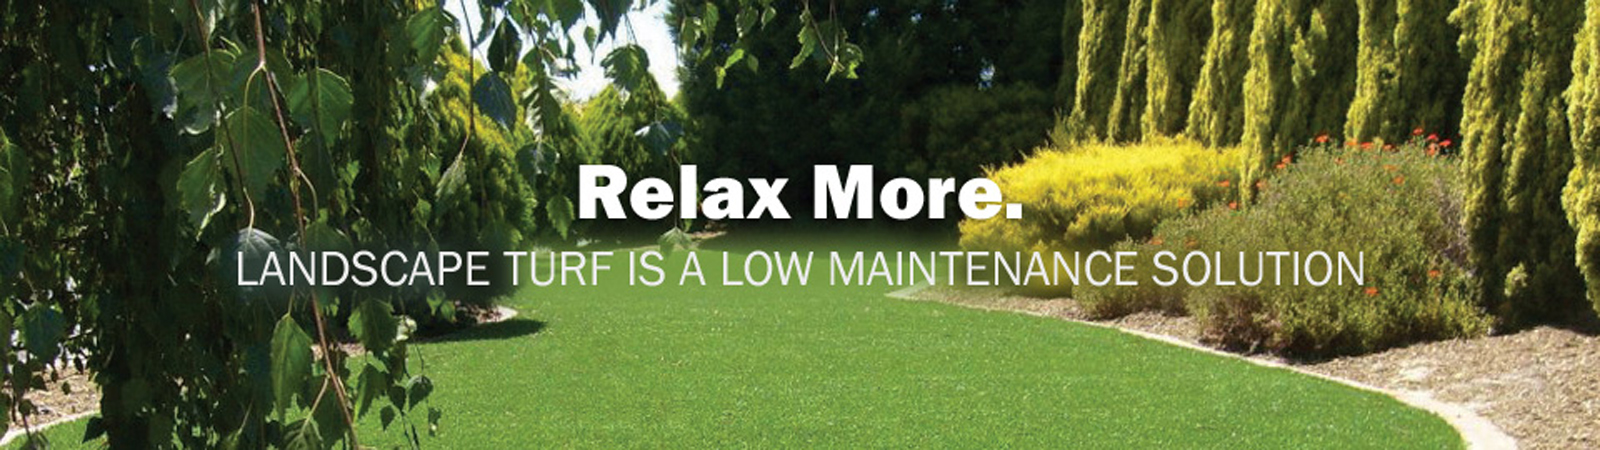 Relax More with Xtreme Lawn landscaping turf